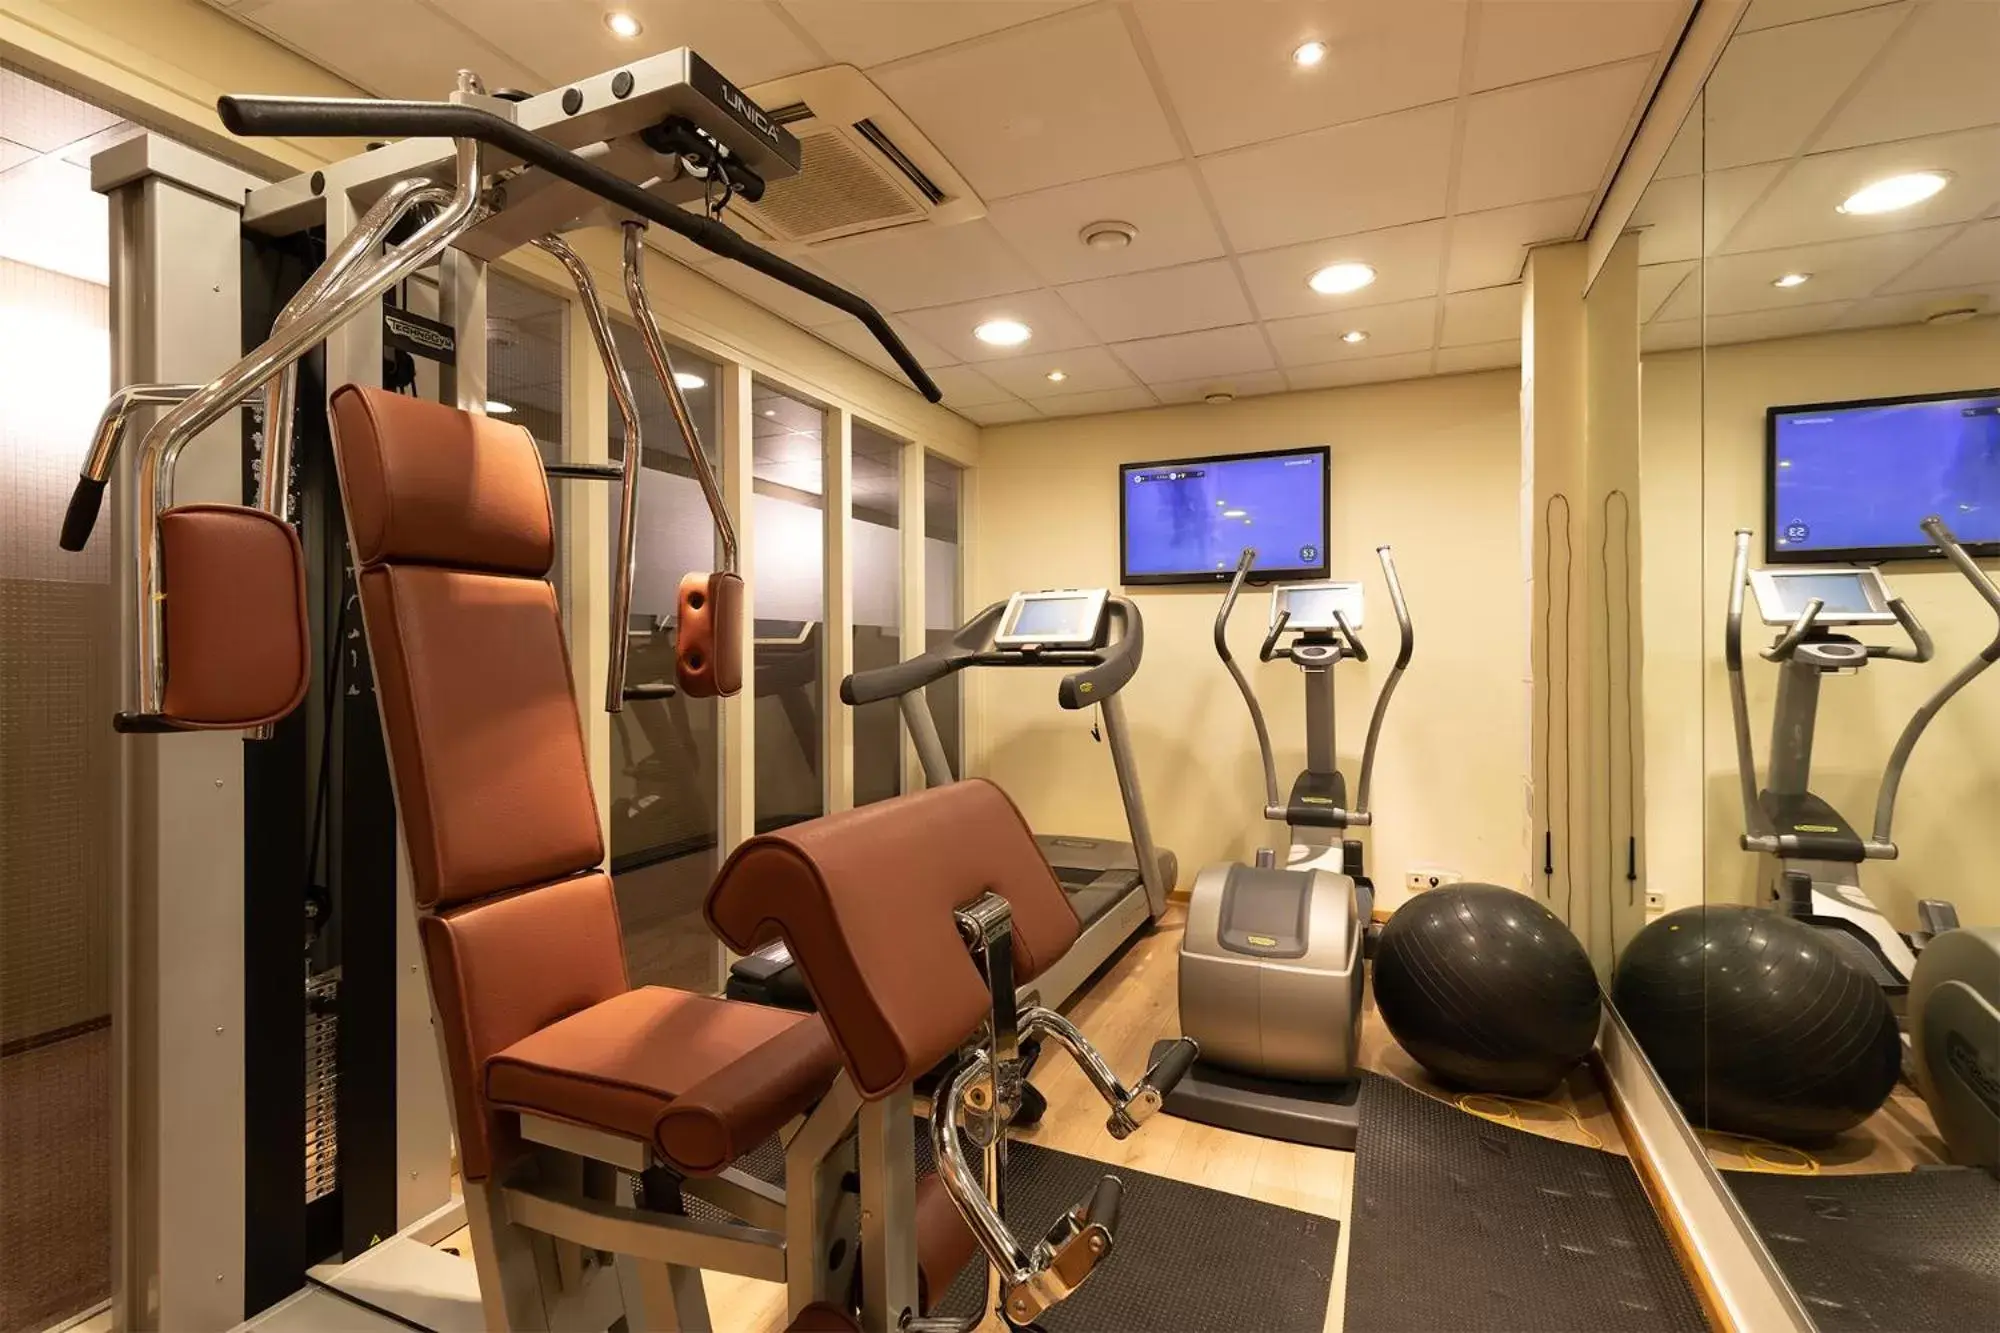 Fitness centre/facilities, Fitness Center/Facilities in Dikker & Thijs Hotel